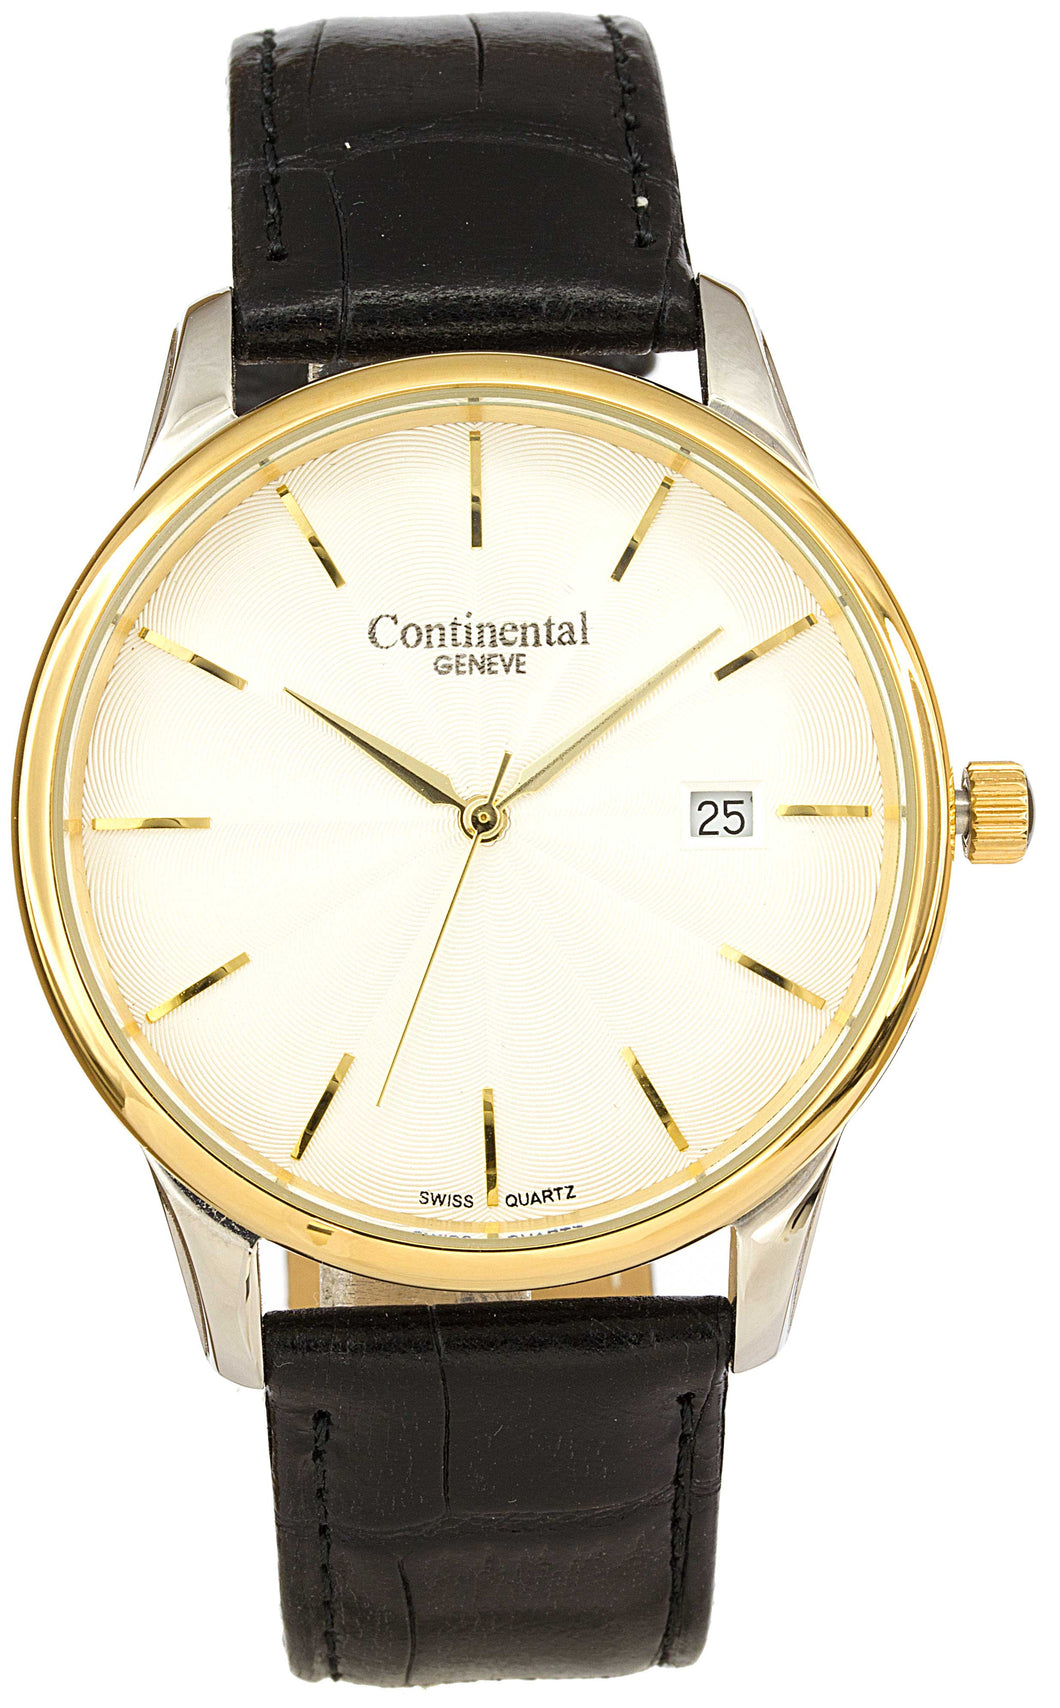 420044 Gents Continental Geneve Two Tone Stainless Steel Watch with Date, Textured Dial